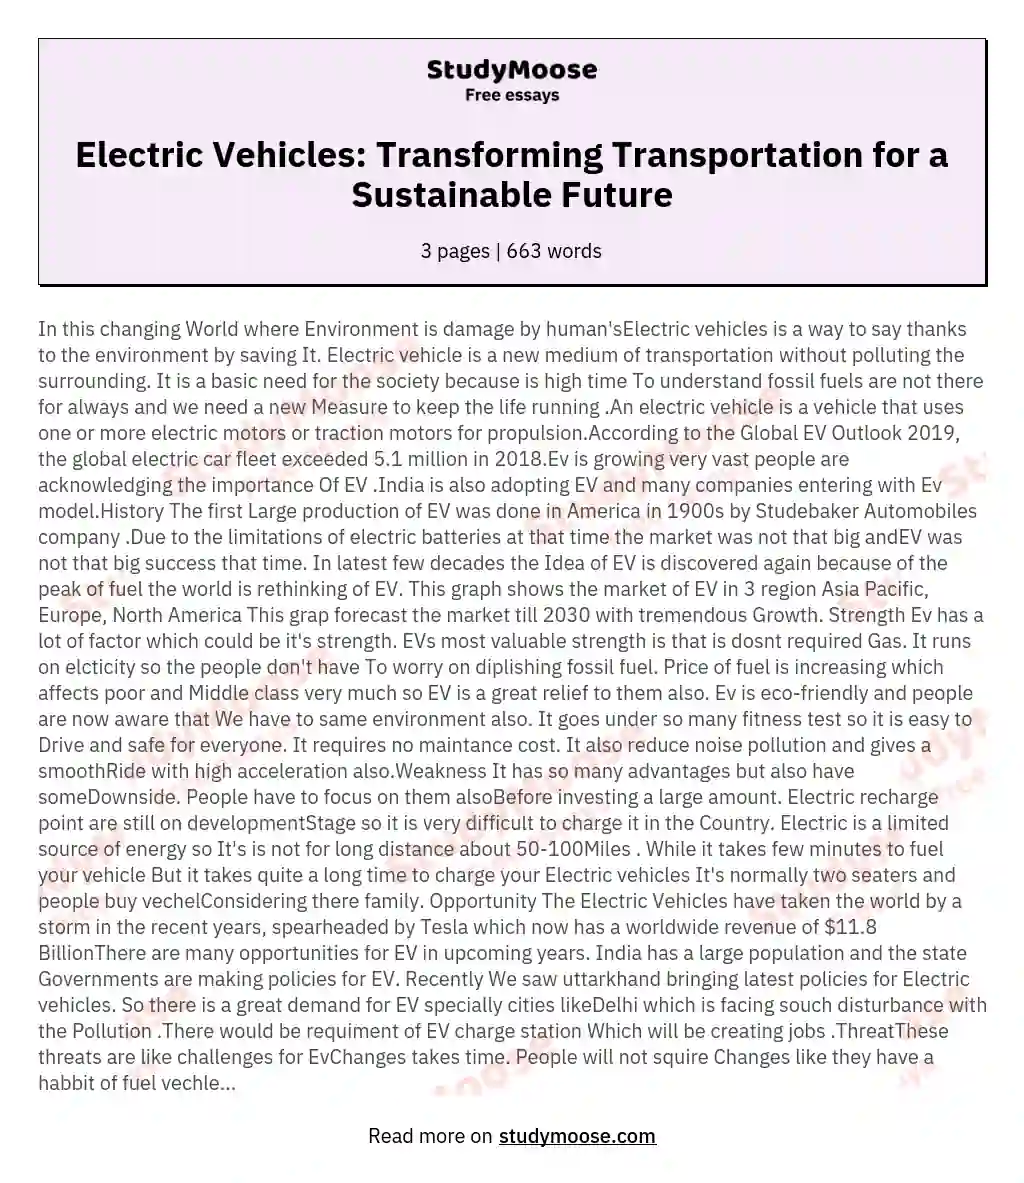 Electric Vehicles: Transforming Transportation for a Sustainable Future essay